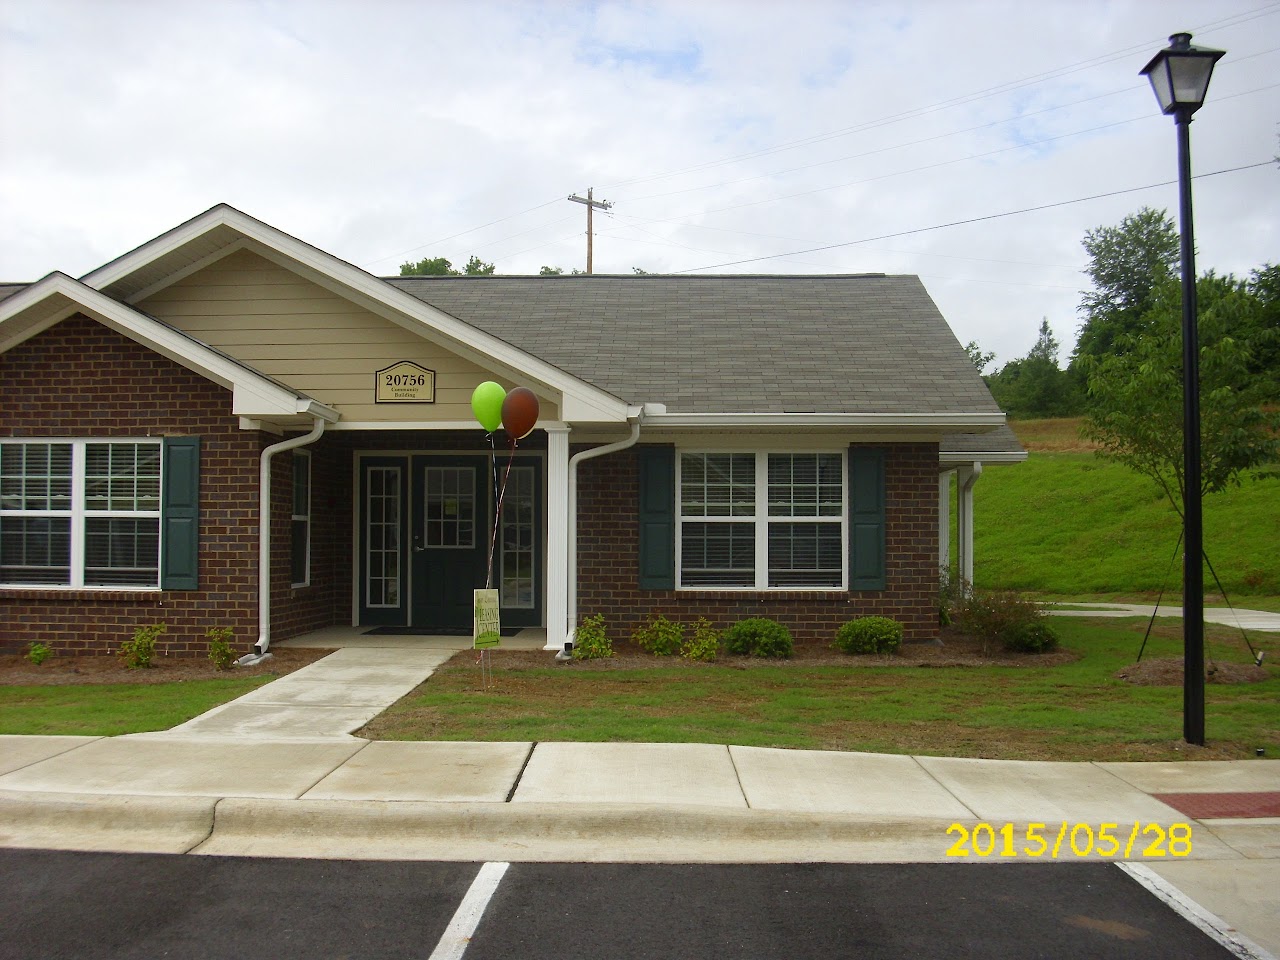 Photo of FRENCH FARMS VILLAGE APTS. Affordable housing located at 20766 VICTORIA WAY ATHENS, AL 35611